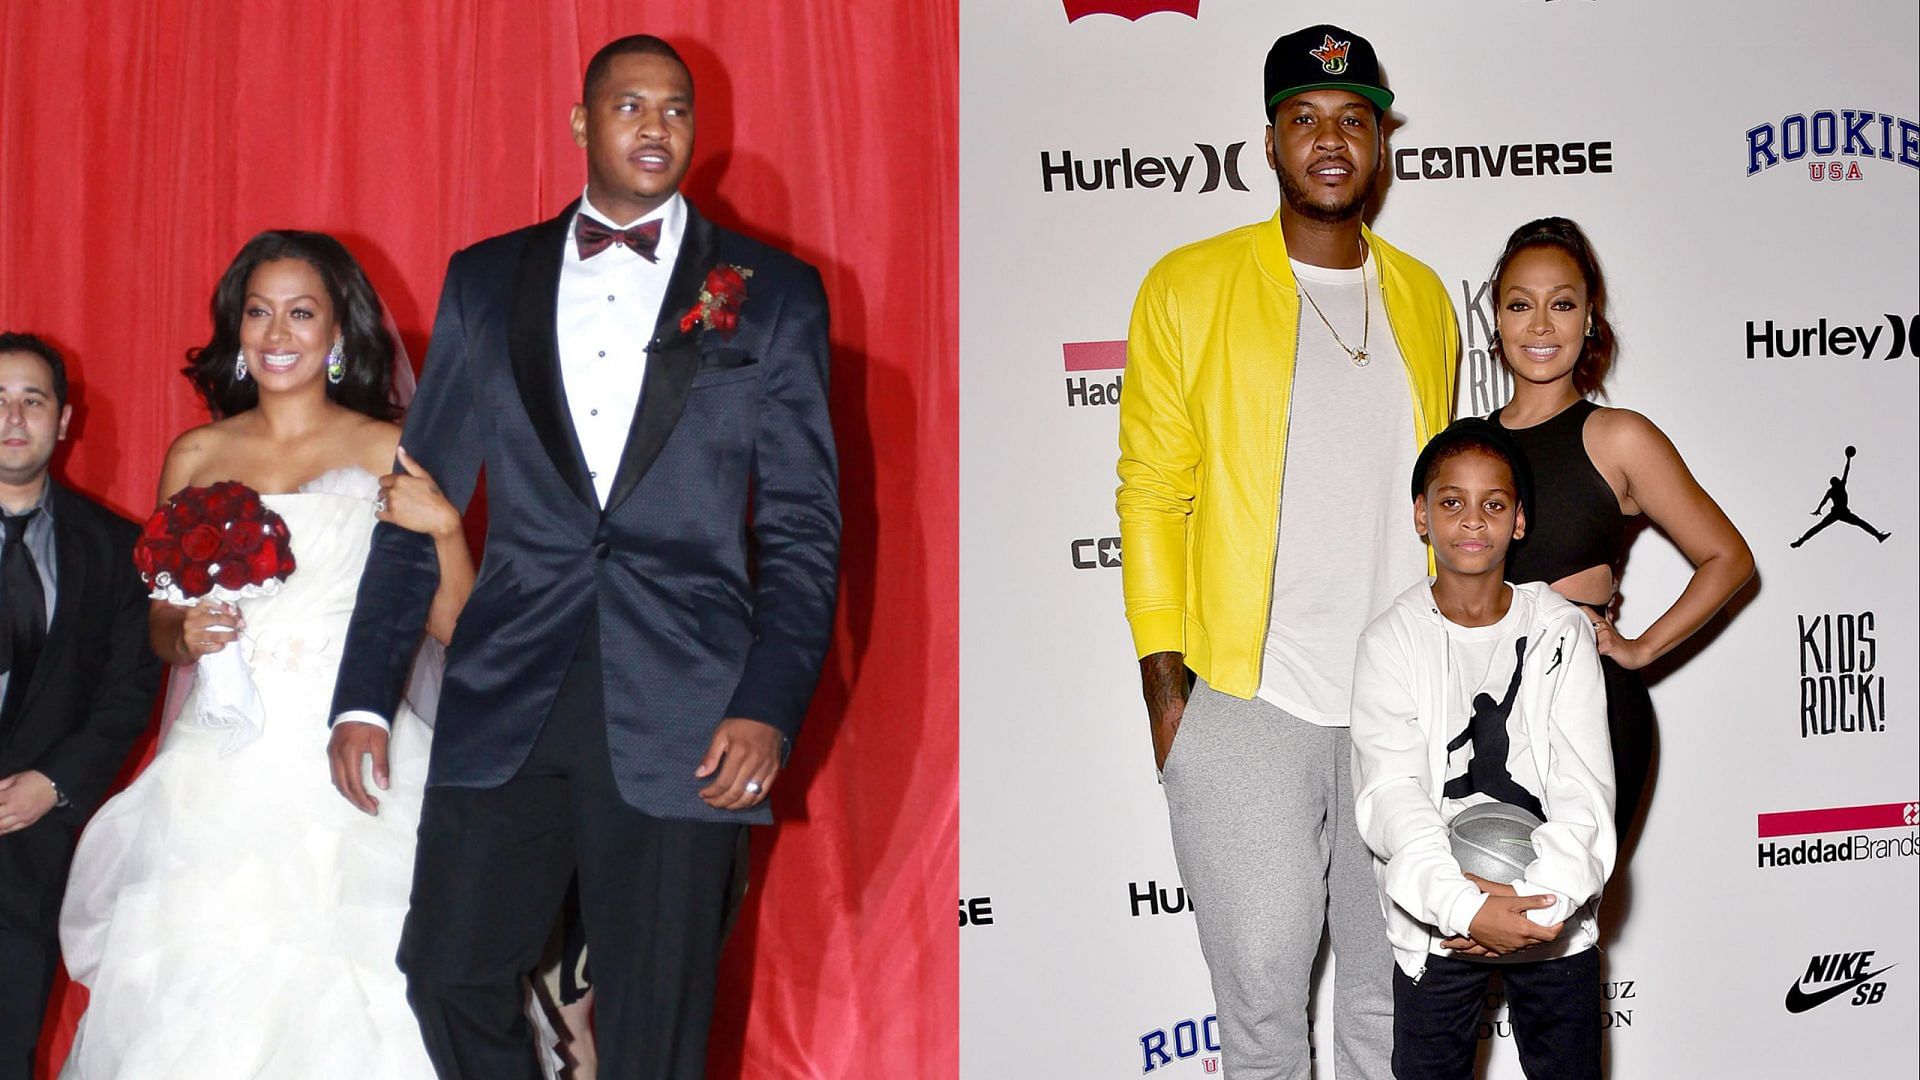 How were Carmelo Anthony’s Early Life, Marriage, and Children?